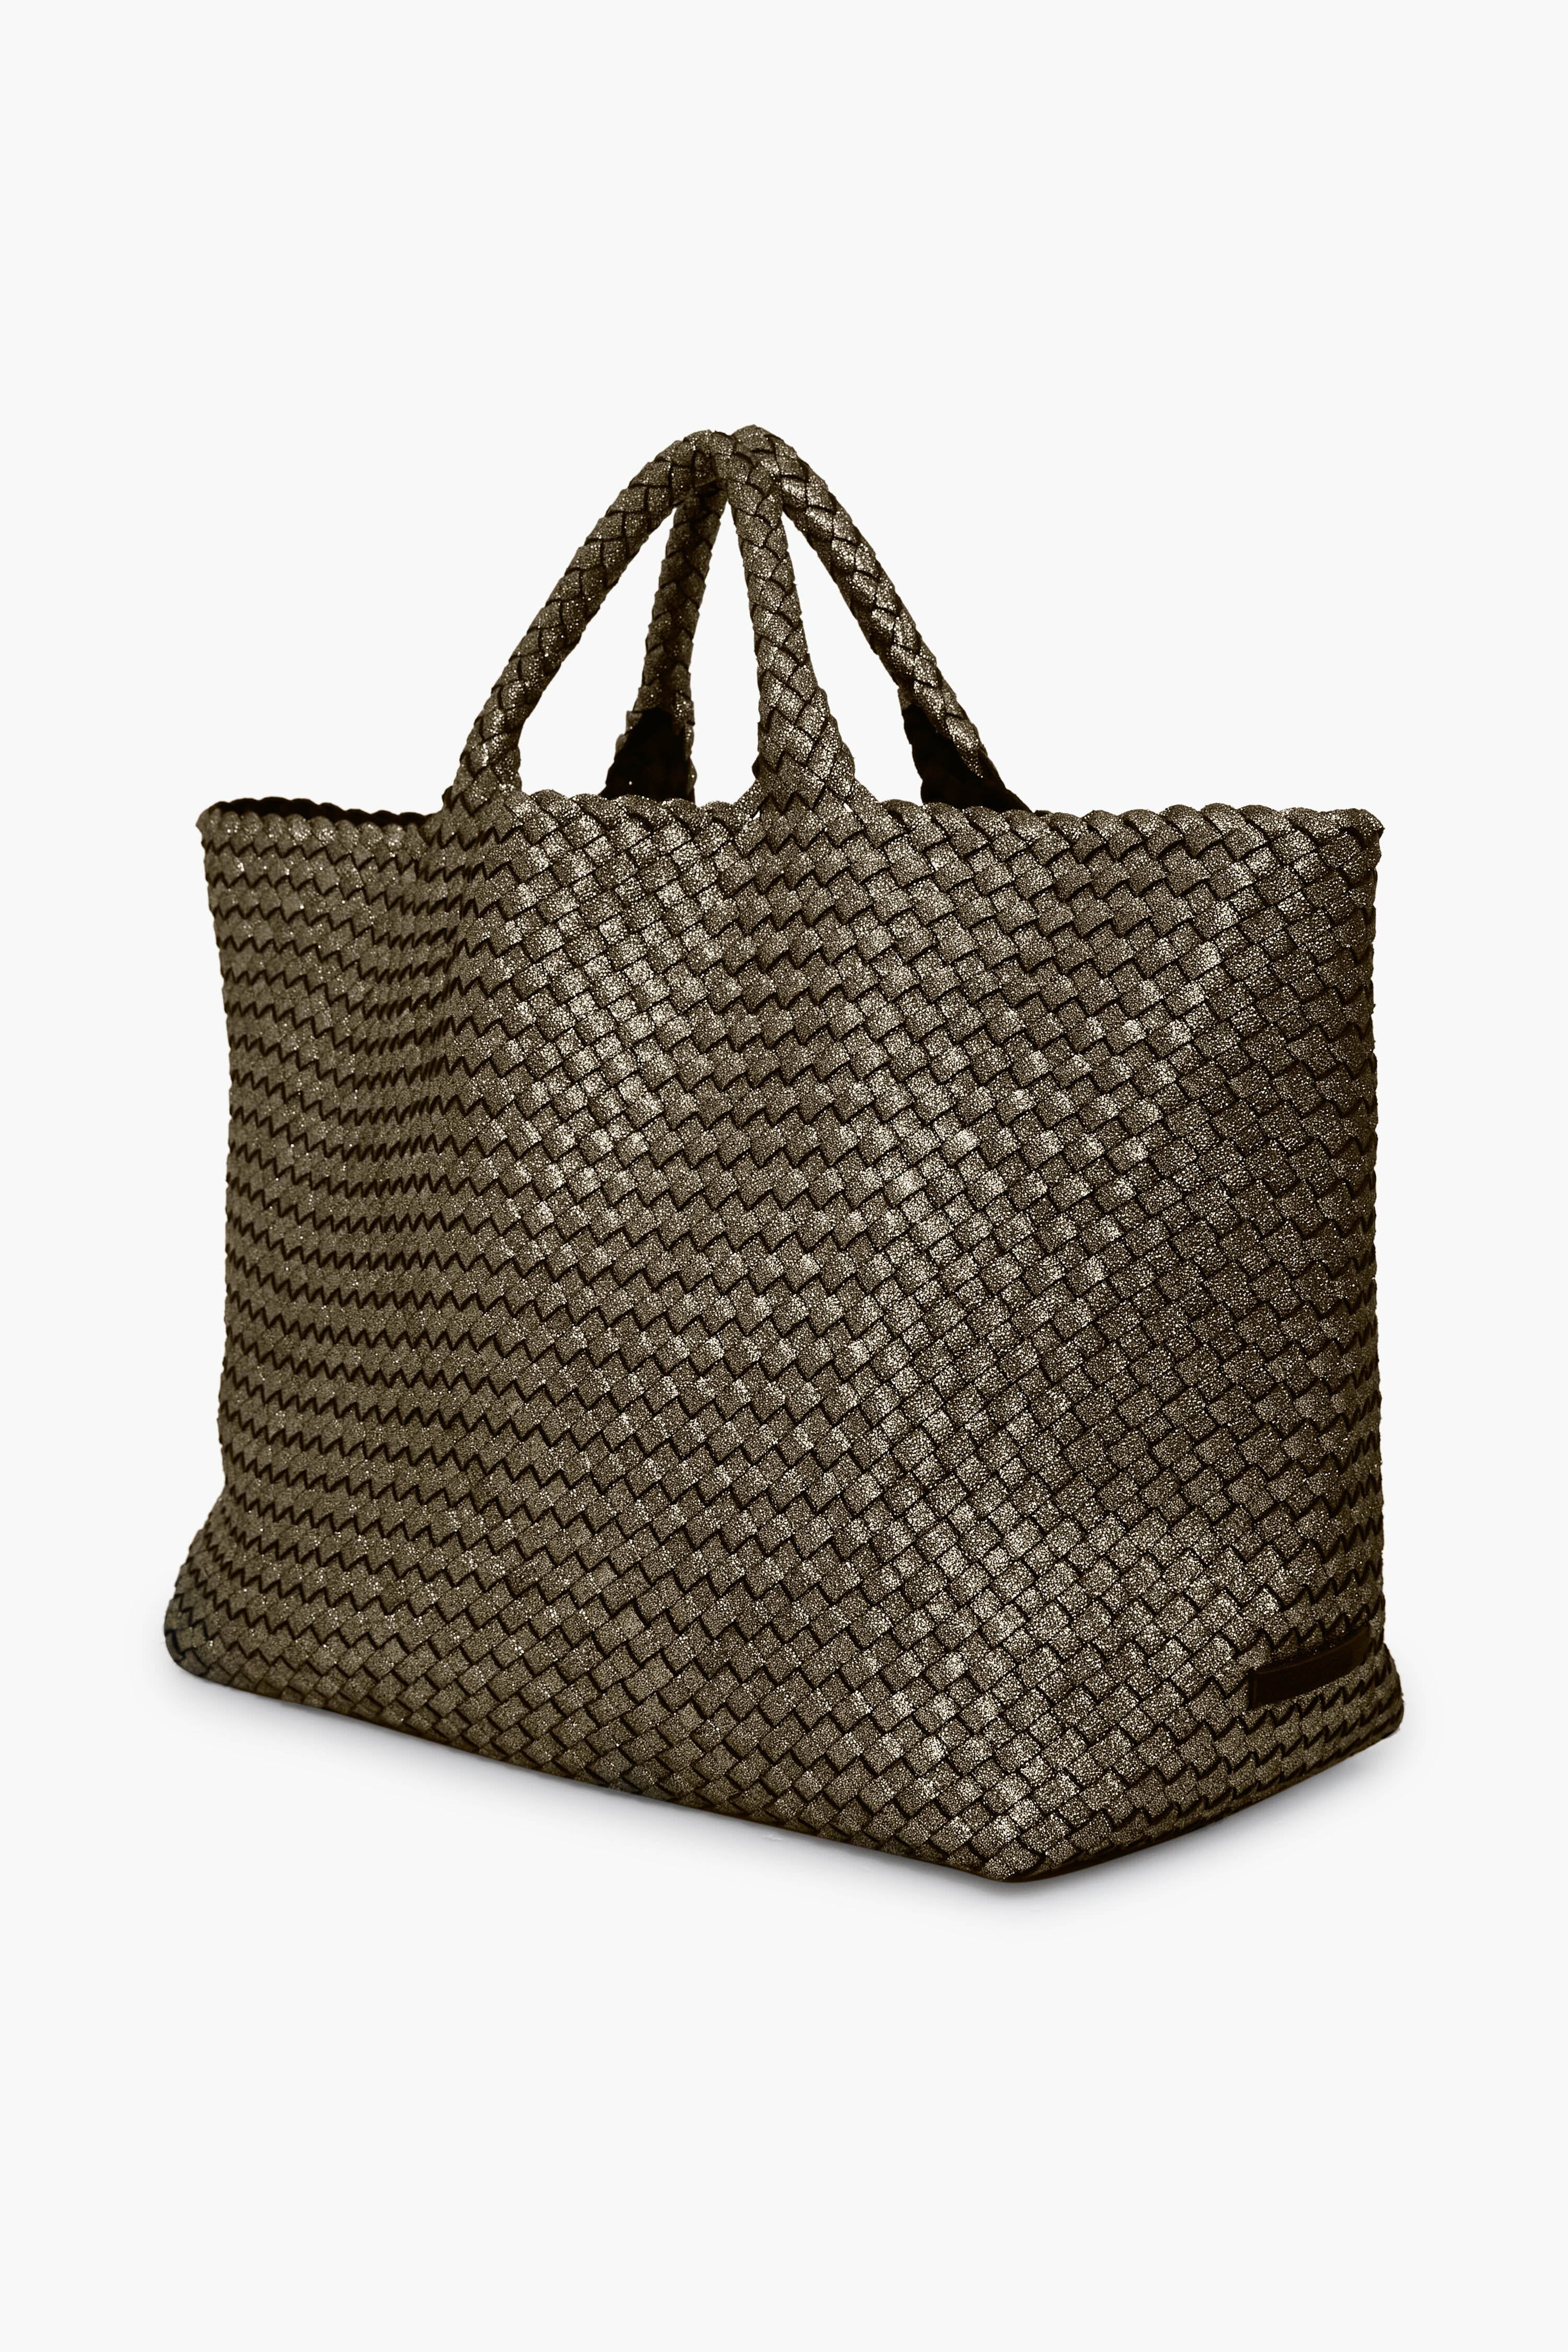 Naghedi St Barths Large Tote – My Review! - Helen Loves